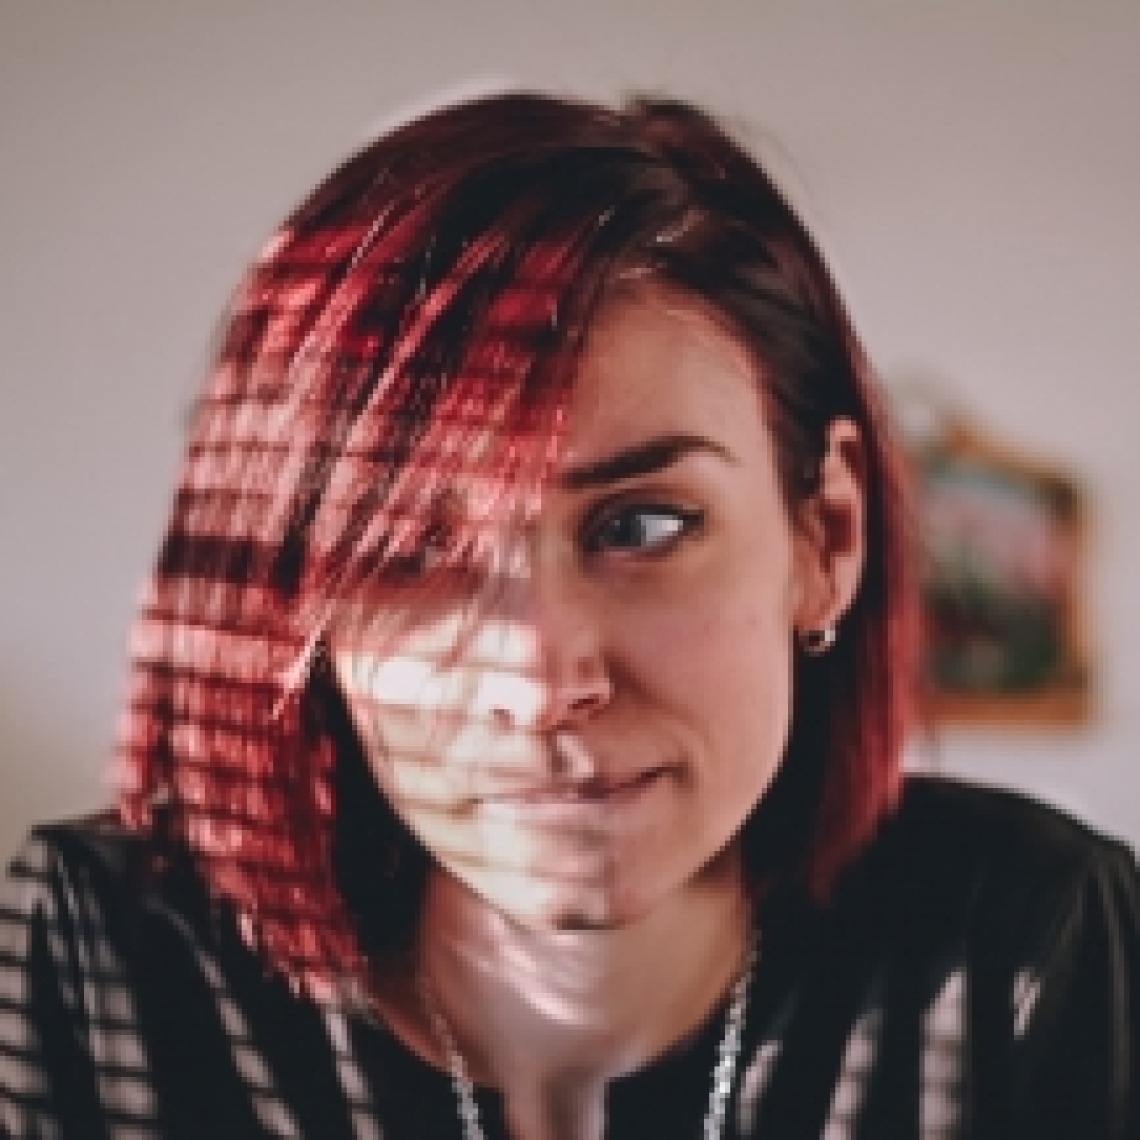 Caucasian girl with red-dyed hair pensively looking to left side with tight lips with sunlight coming across face through window blinds